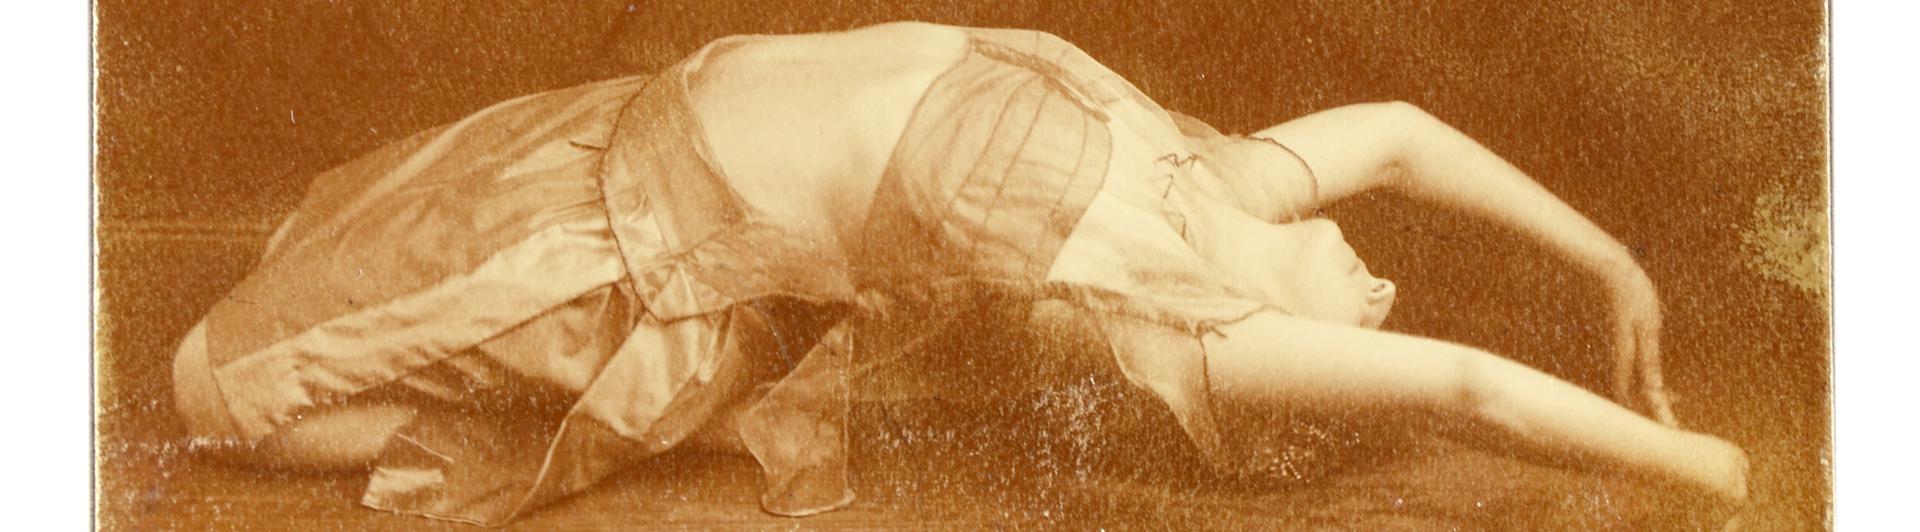 Old photographie showing a woman lying on the floor during a dance performance